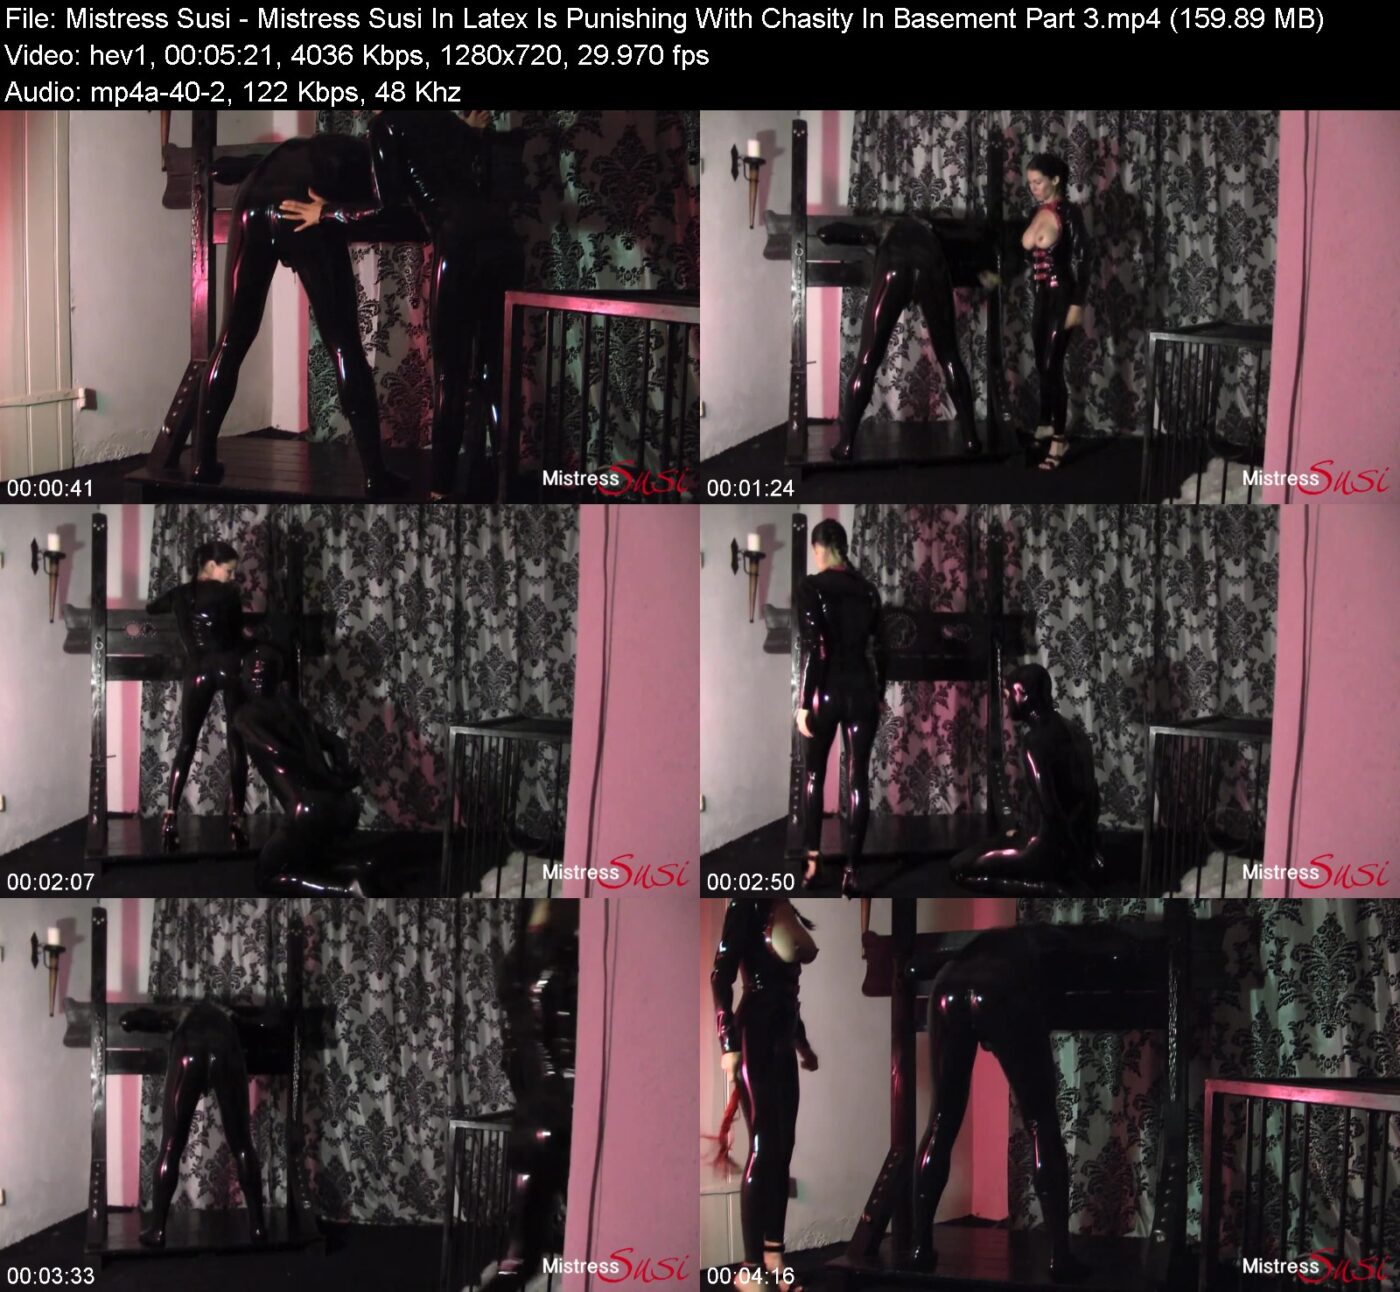 Mistress Susi in Mistress Susi In Latex Is Punishing With Chasity In Basement Part 3